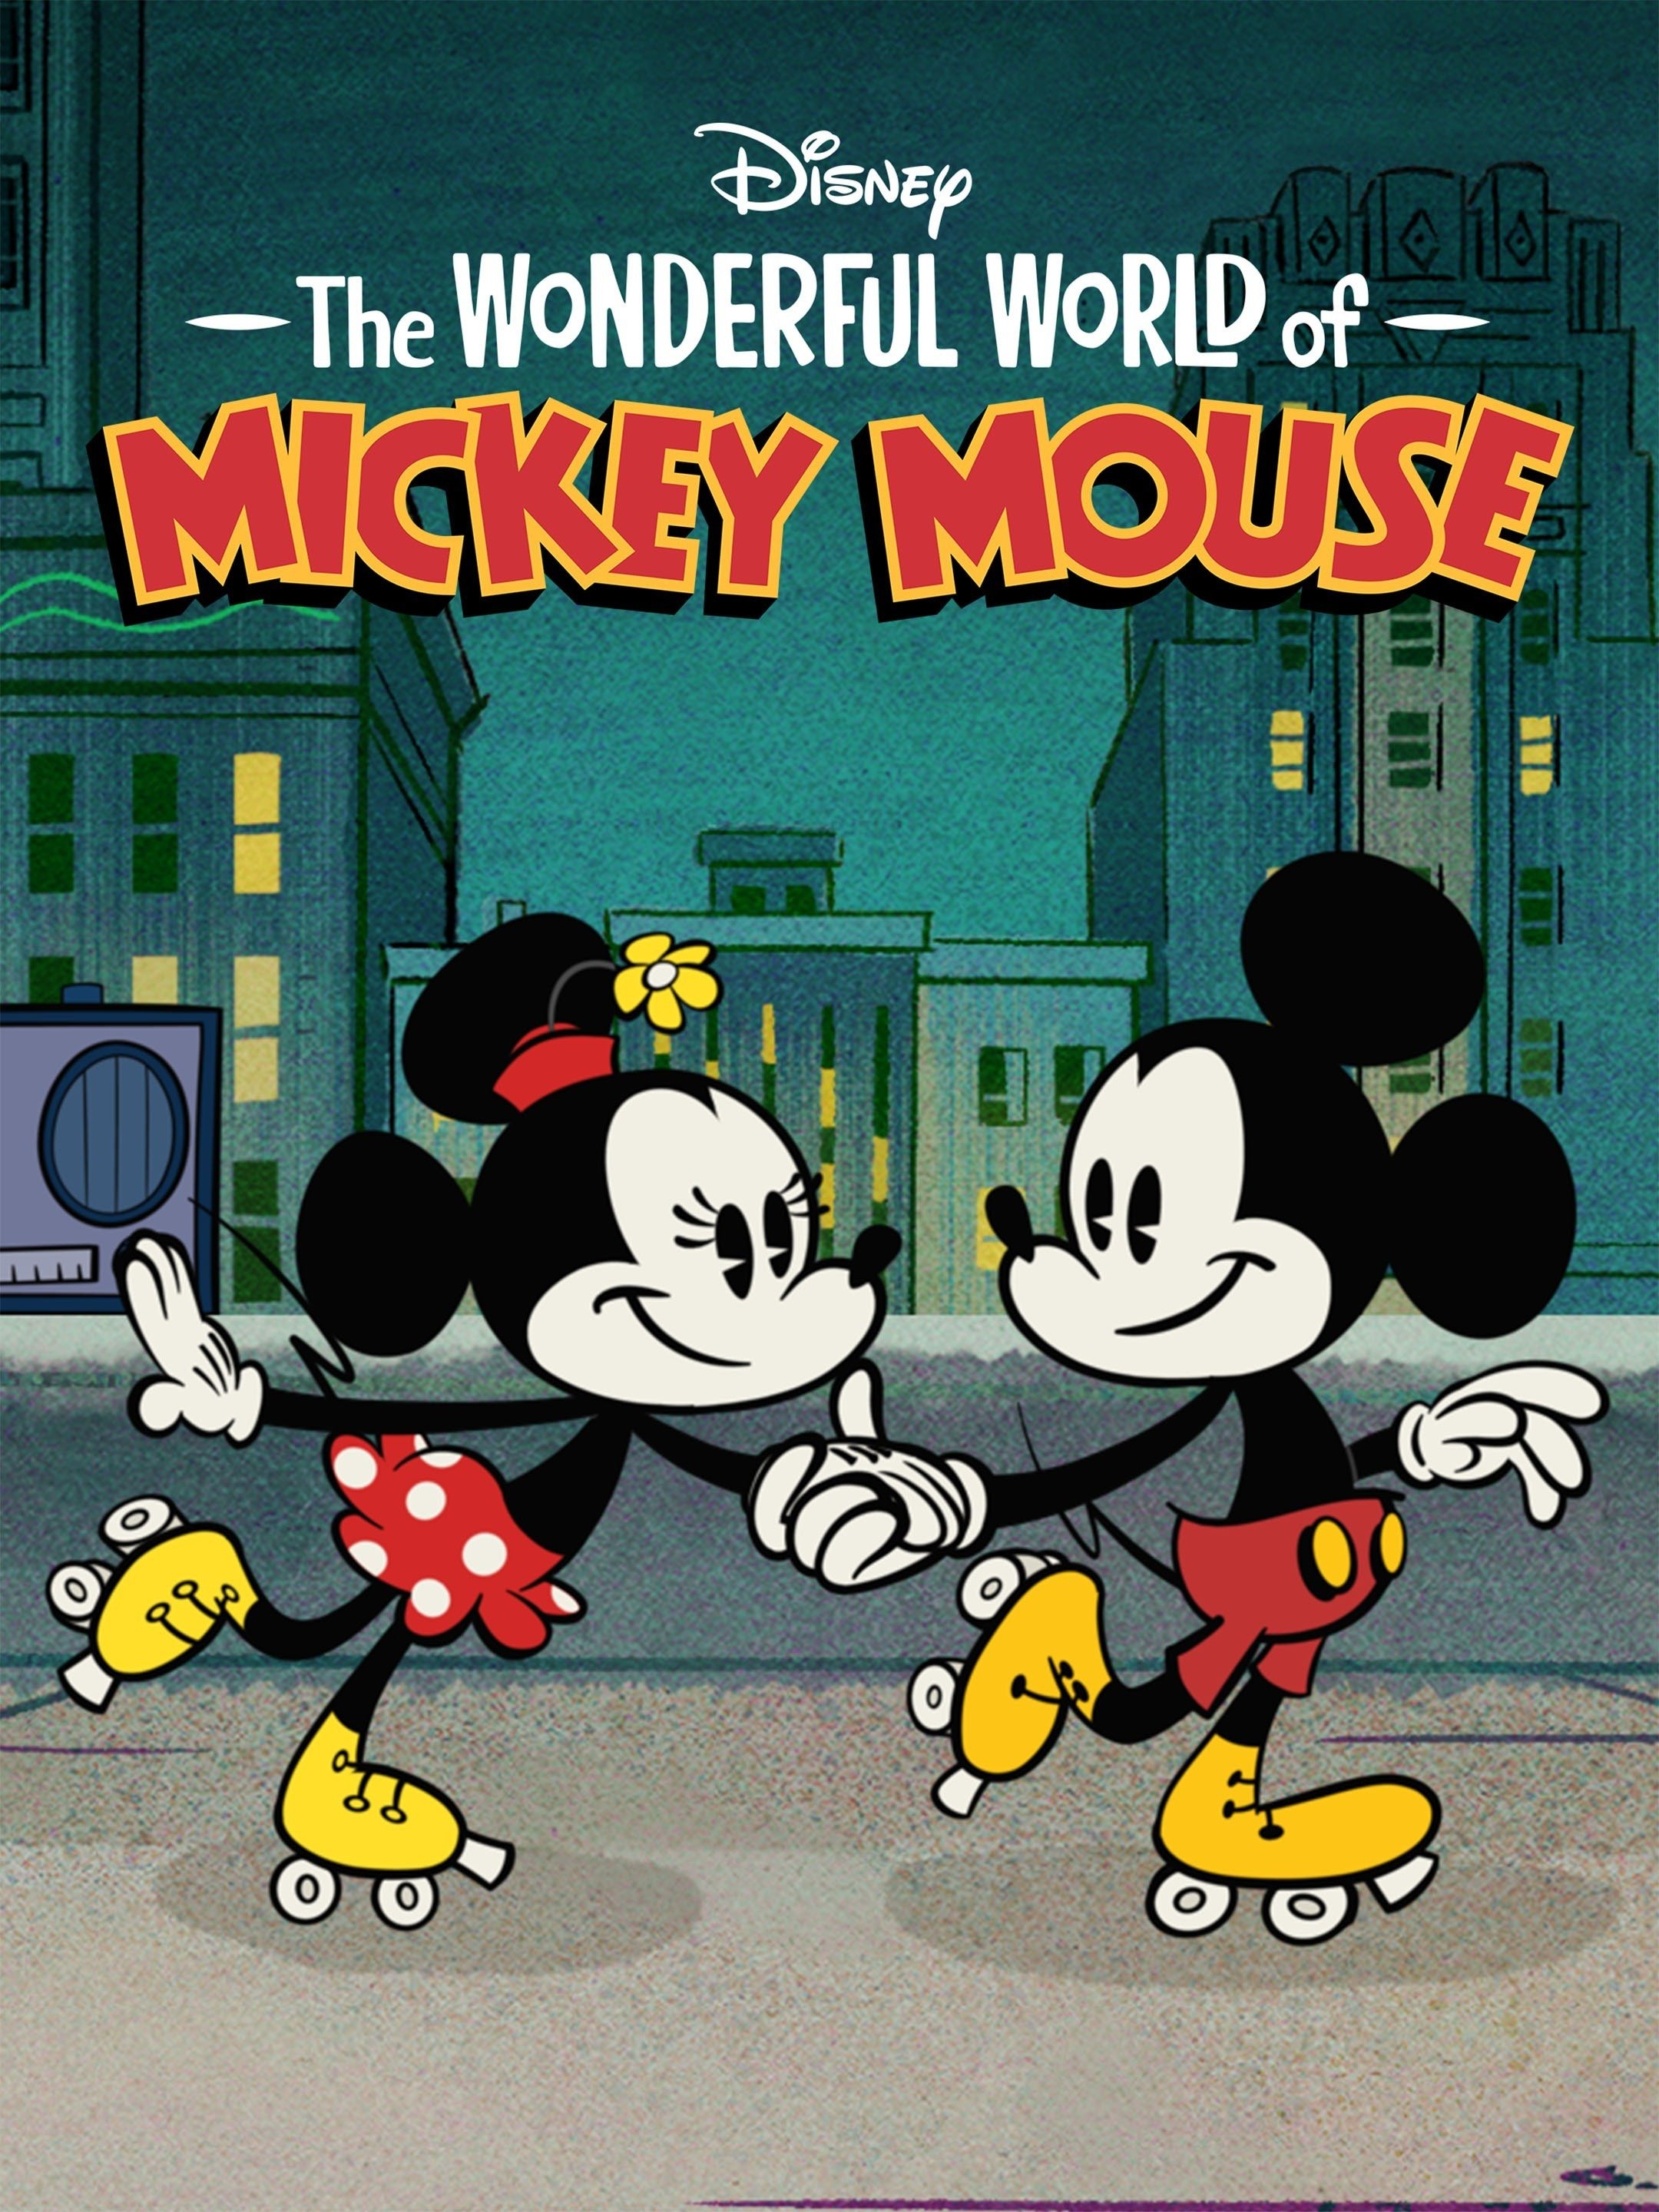 The Wonderful World of Mickey Mouse - Rotten Tomatoes